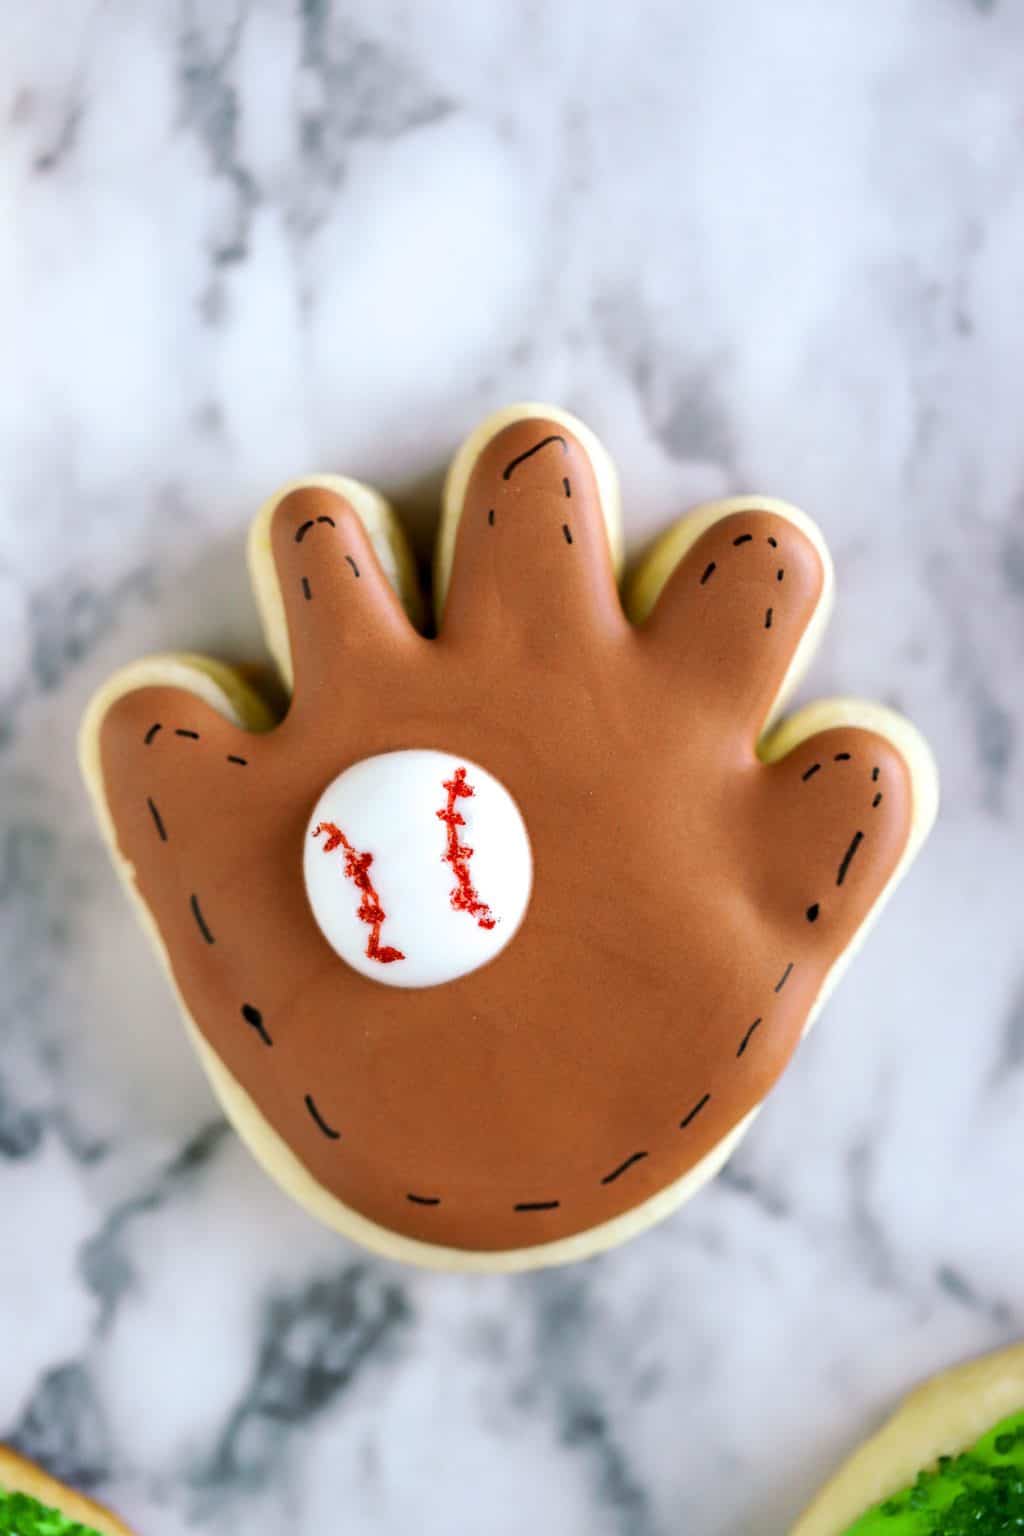 Brown baseball glove cookie with black stitches and a white ball in the glove